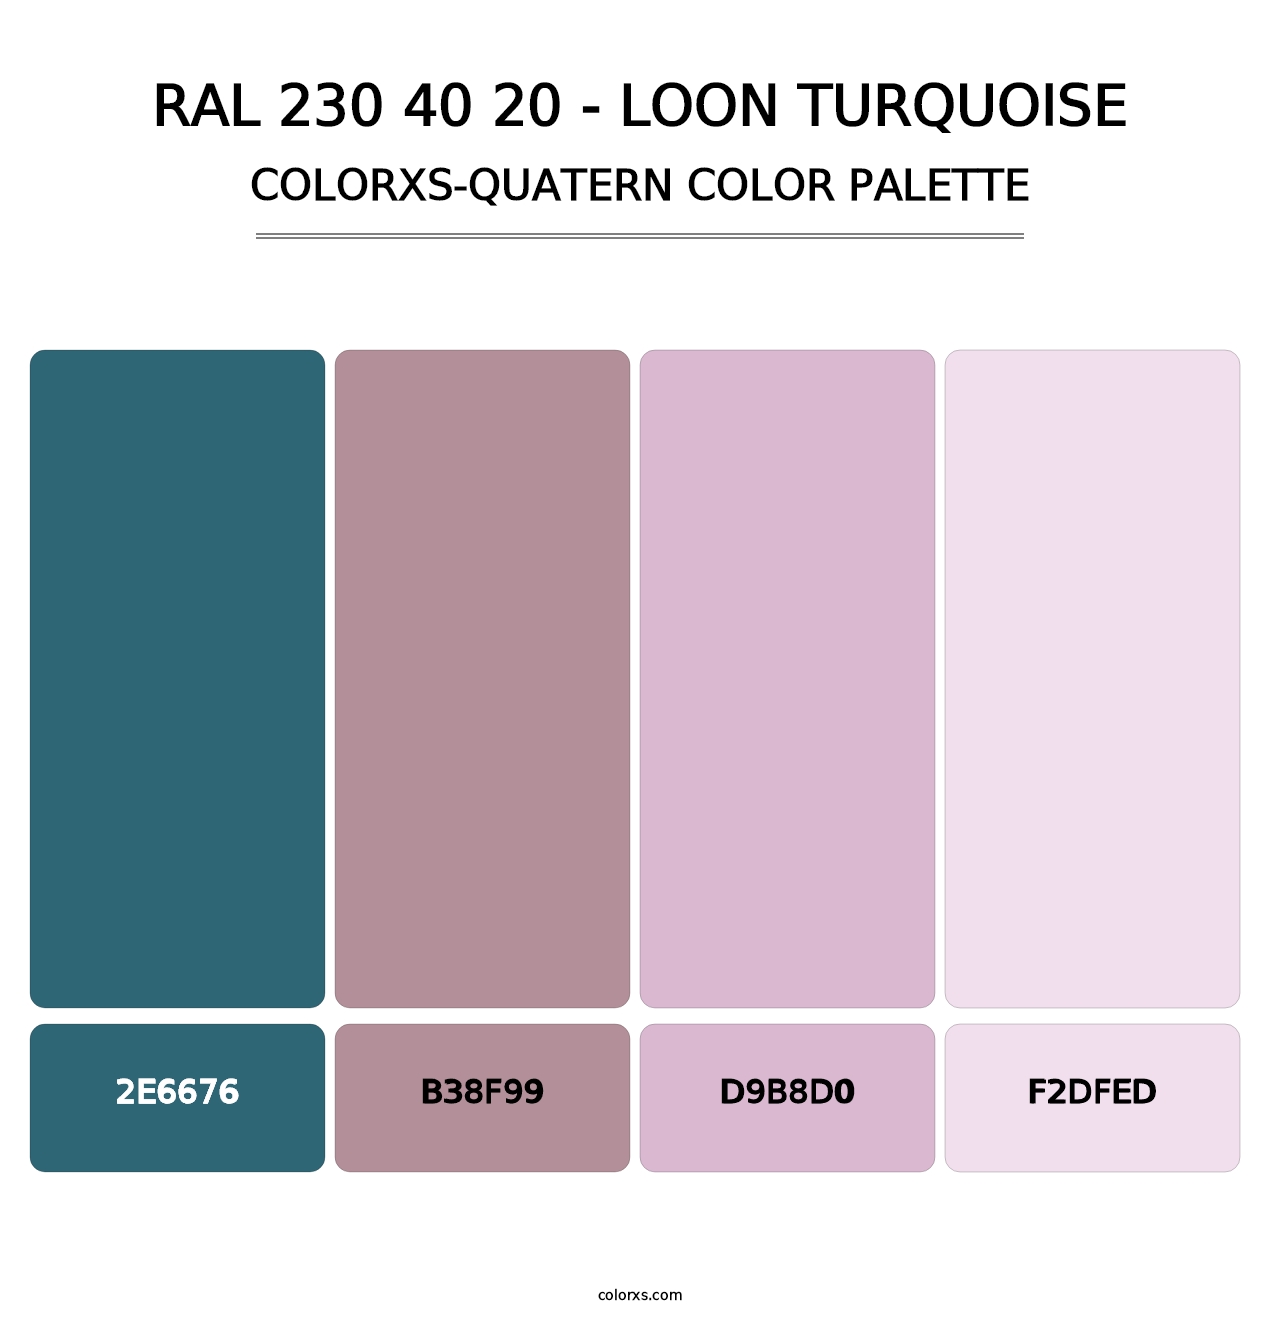 RAL 230 40 20 - Loon Turquoise - Colorxs Quatern Palette